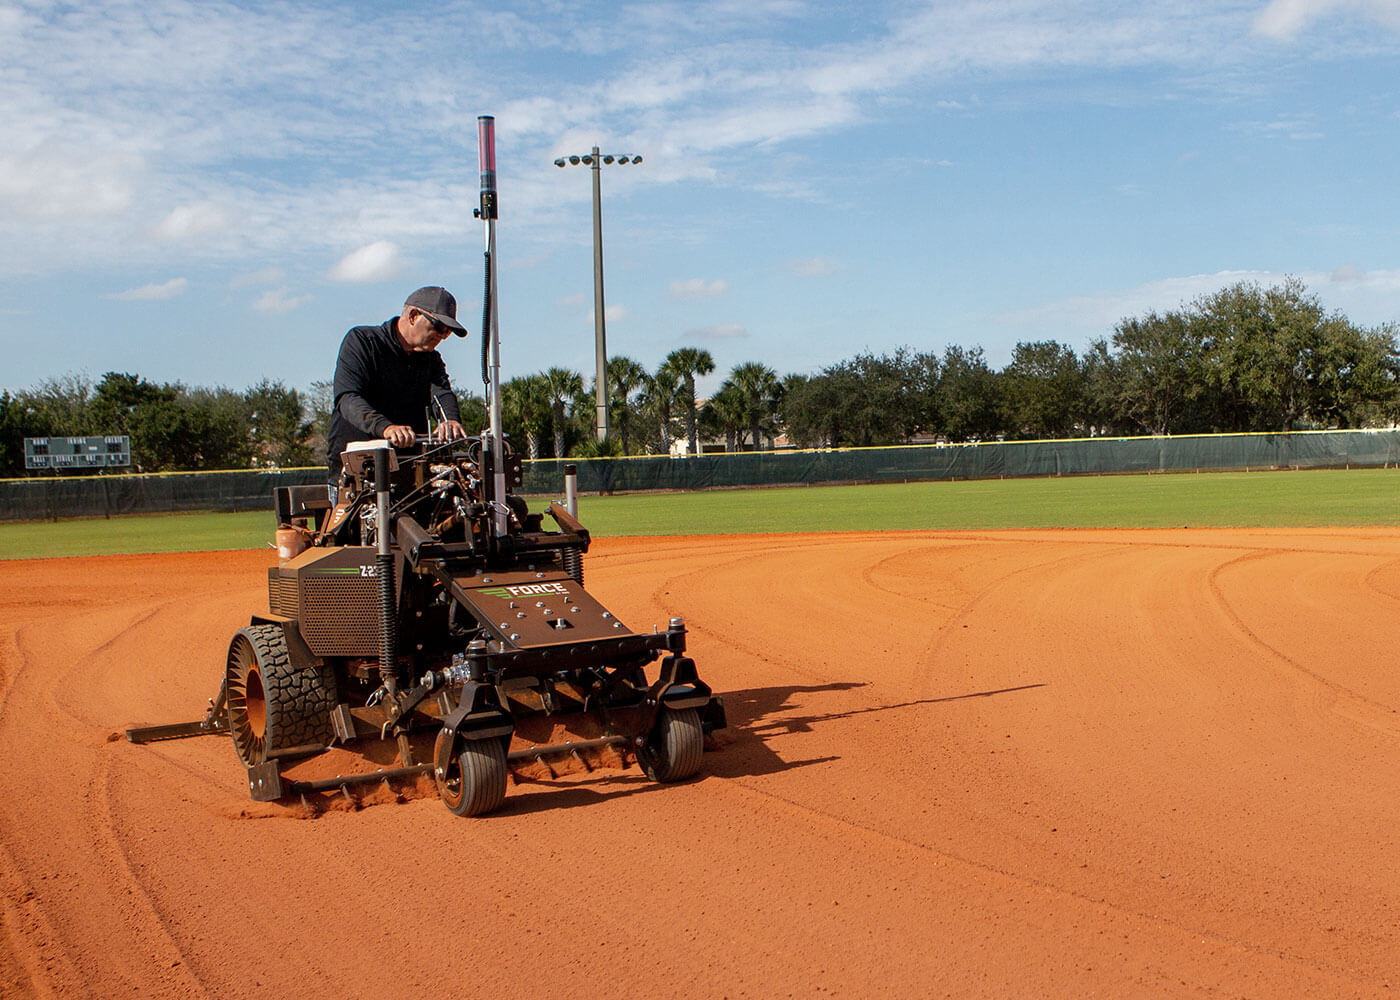 Force precision laser grading smoothing over weather damage on baseball field 